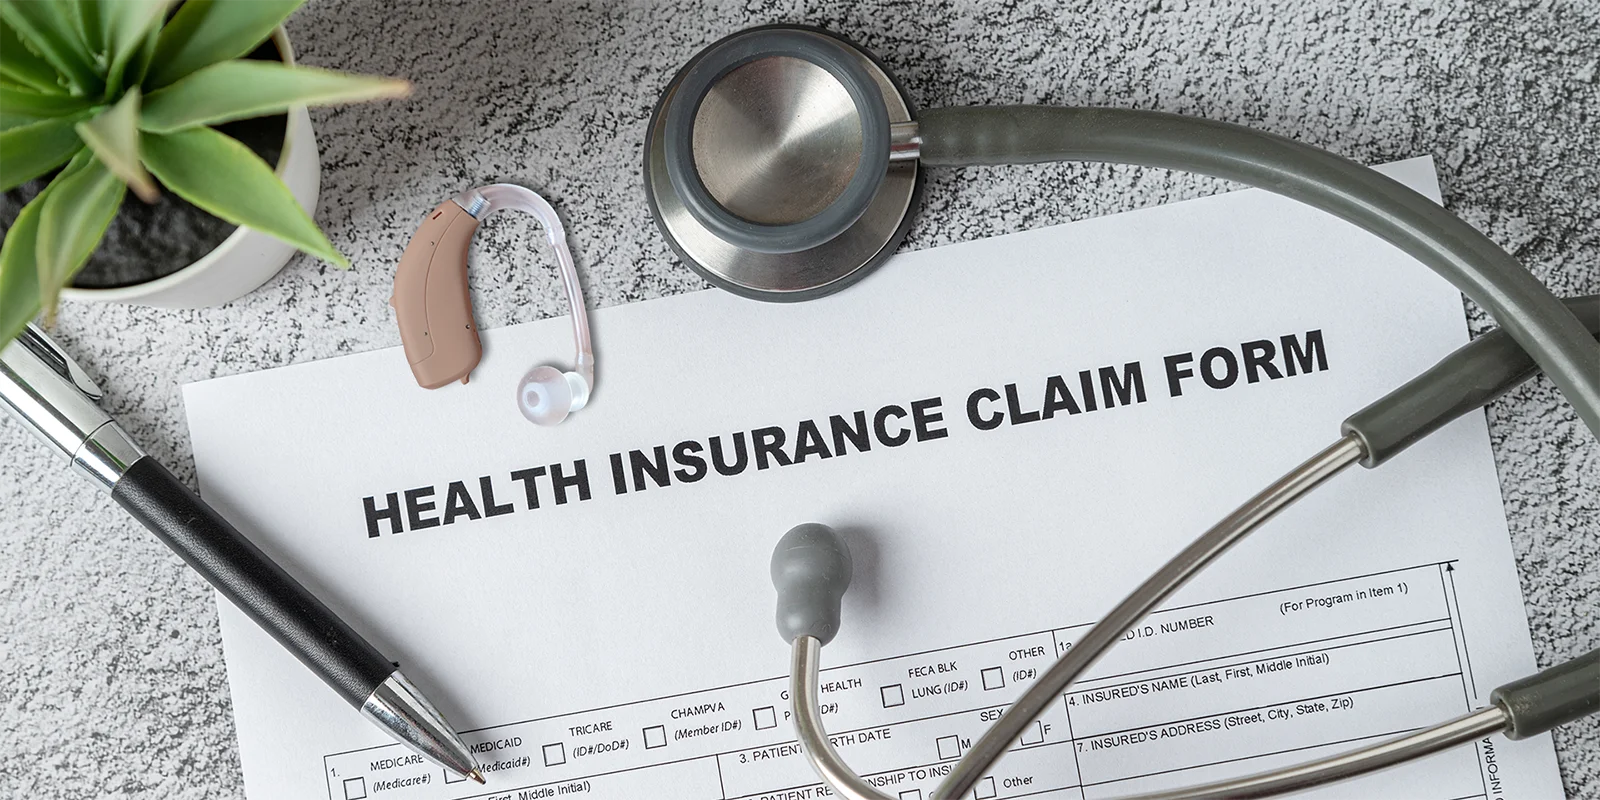 health insurance claim form on desk with stethoscope, hearing aid, and pen